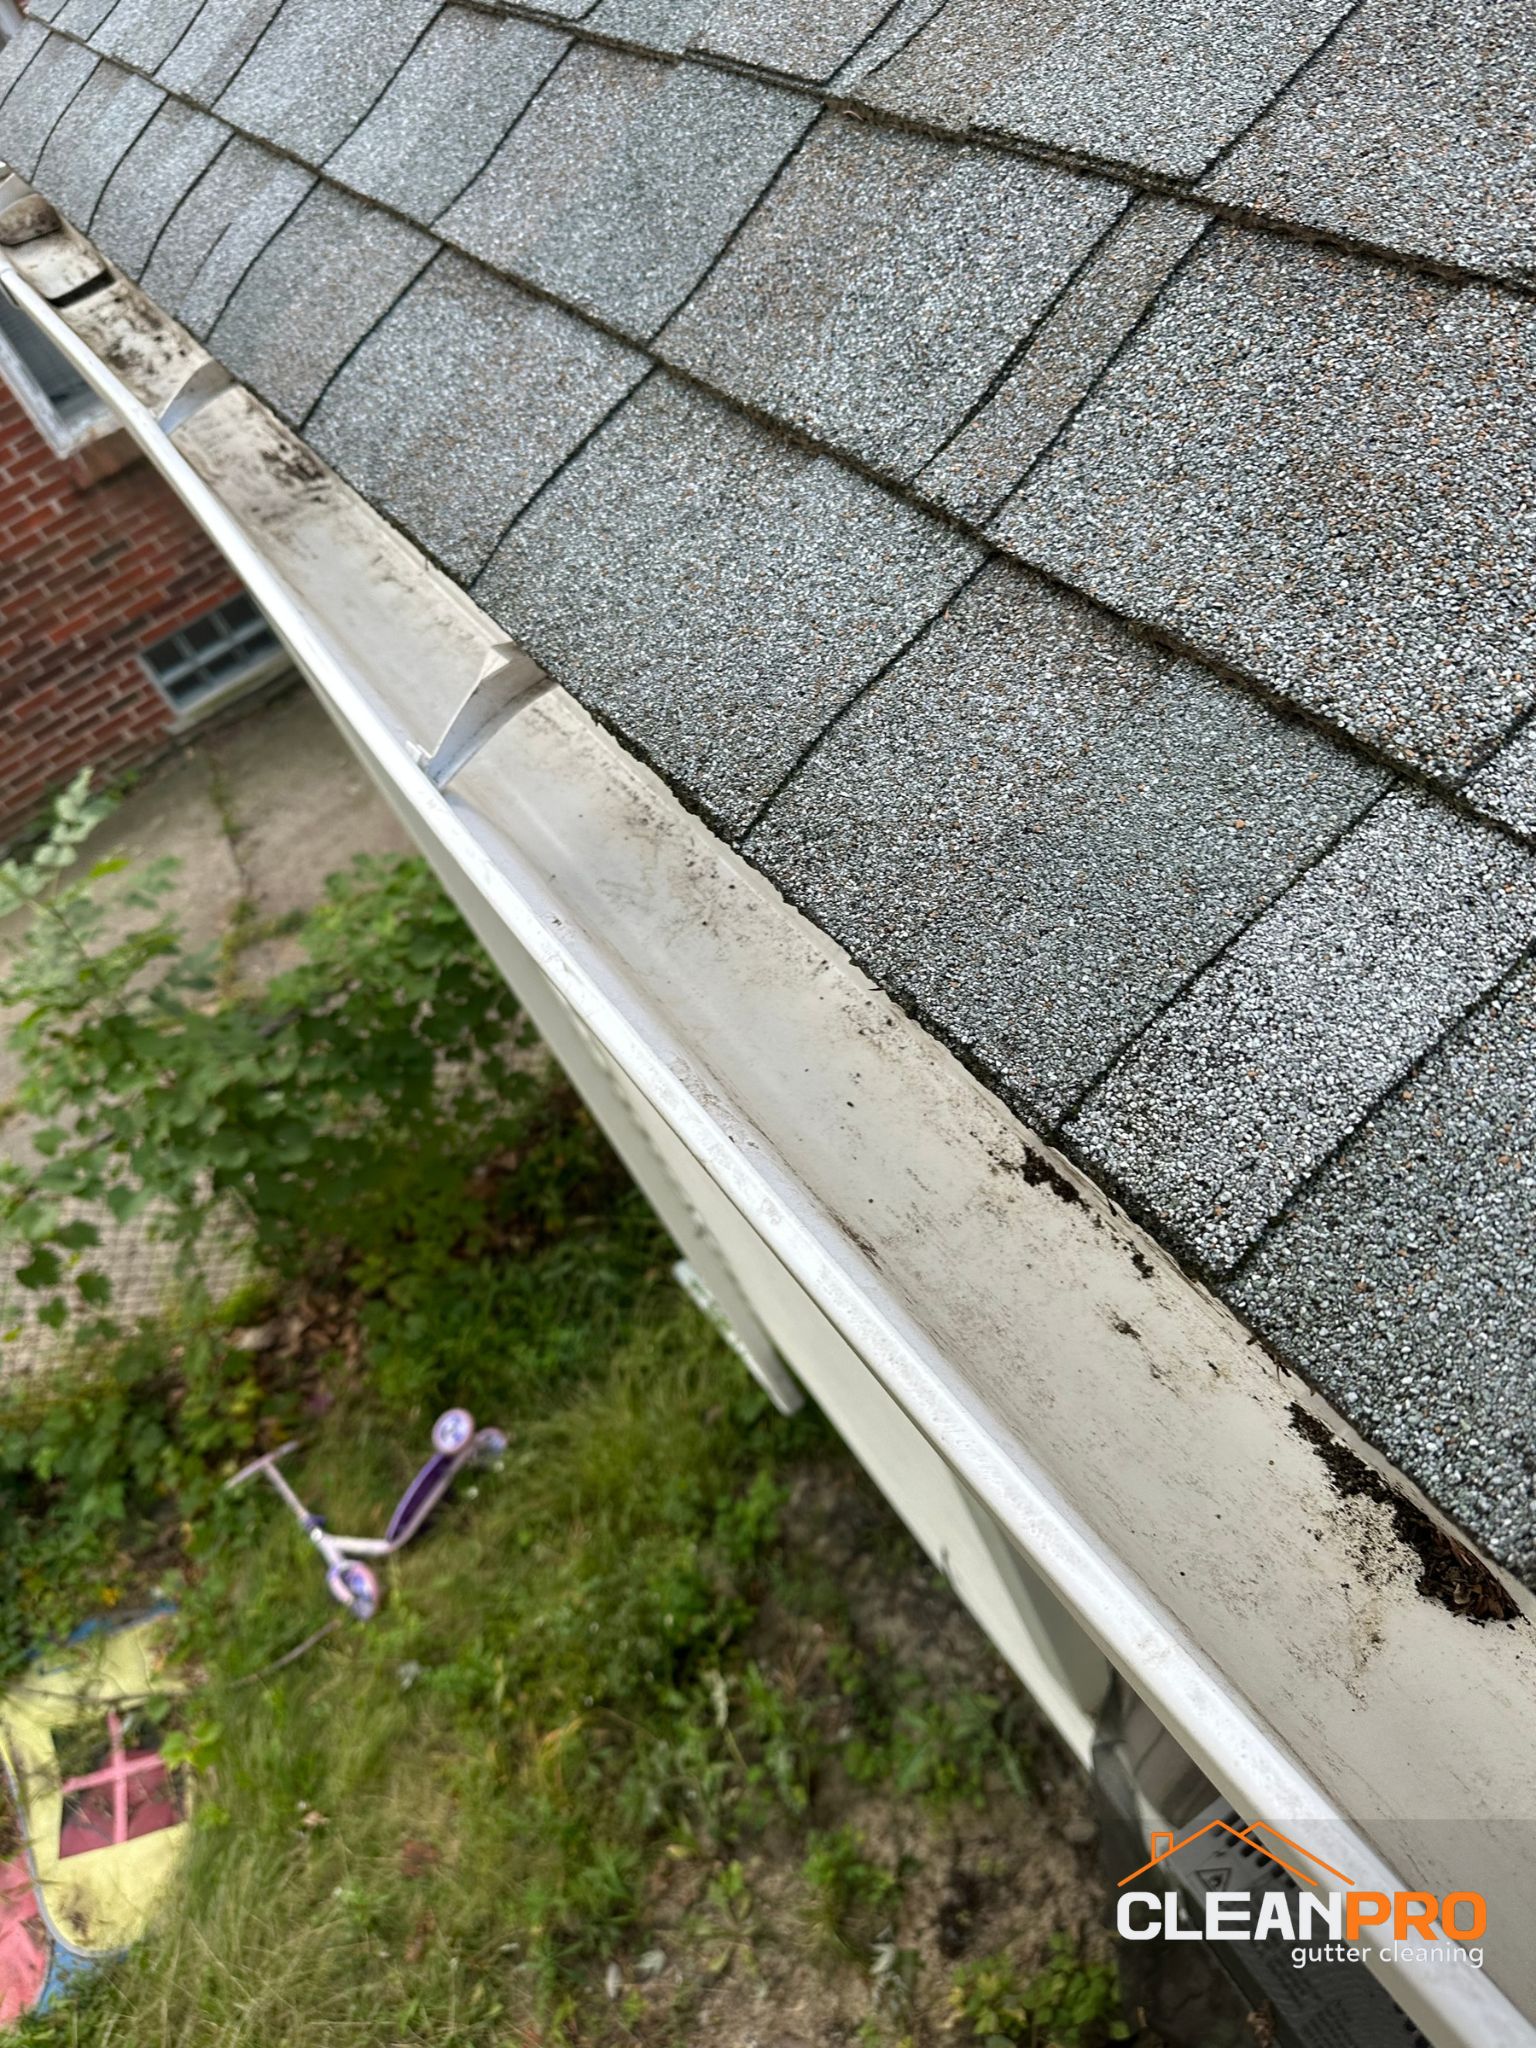 Top Notch Gutter Cleaning Service in Ann Arbor